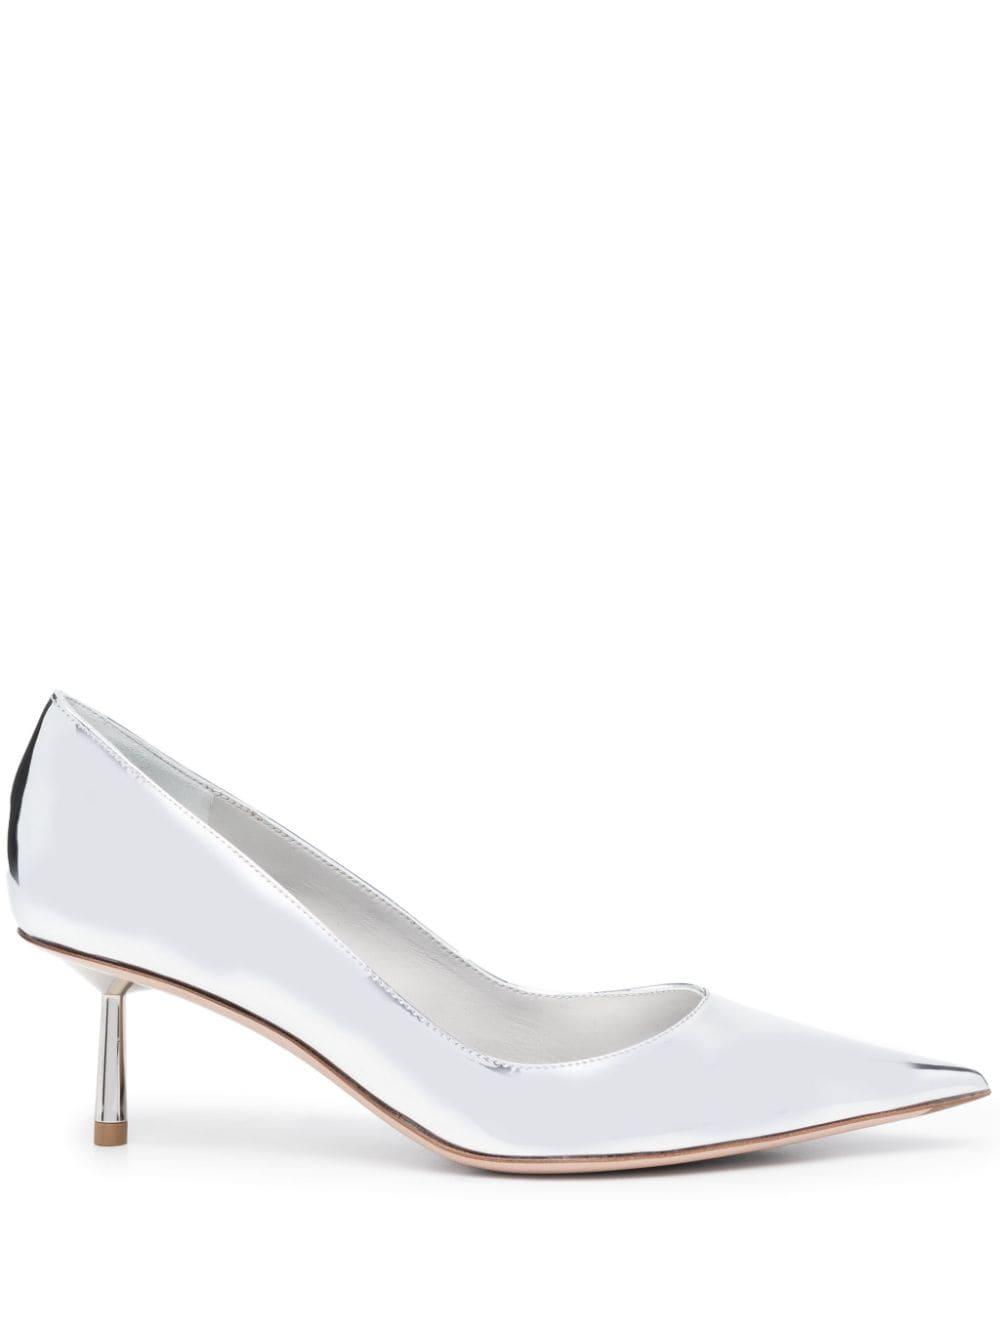 Le Silla Eva 65mm Pointed Leather Pumps in White | Lyst